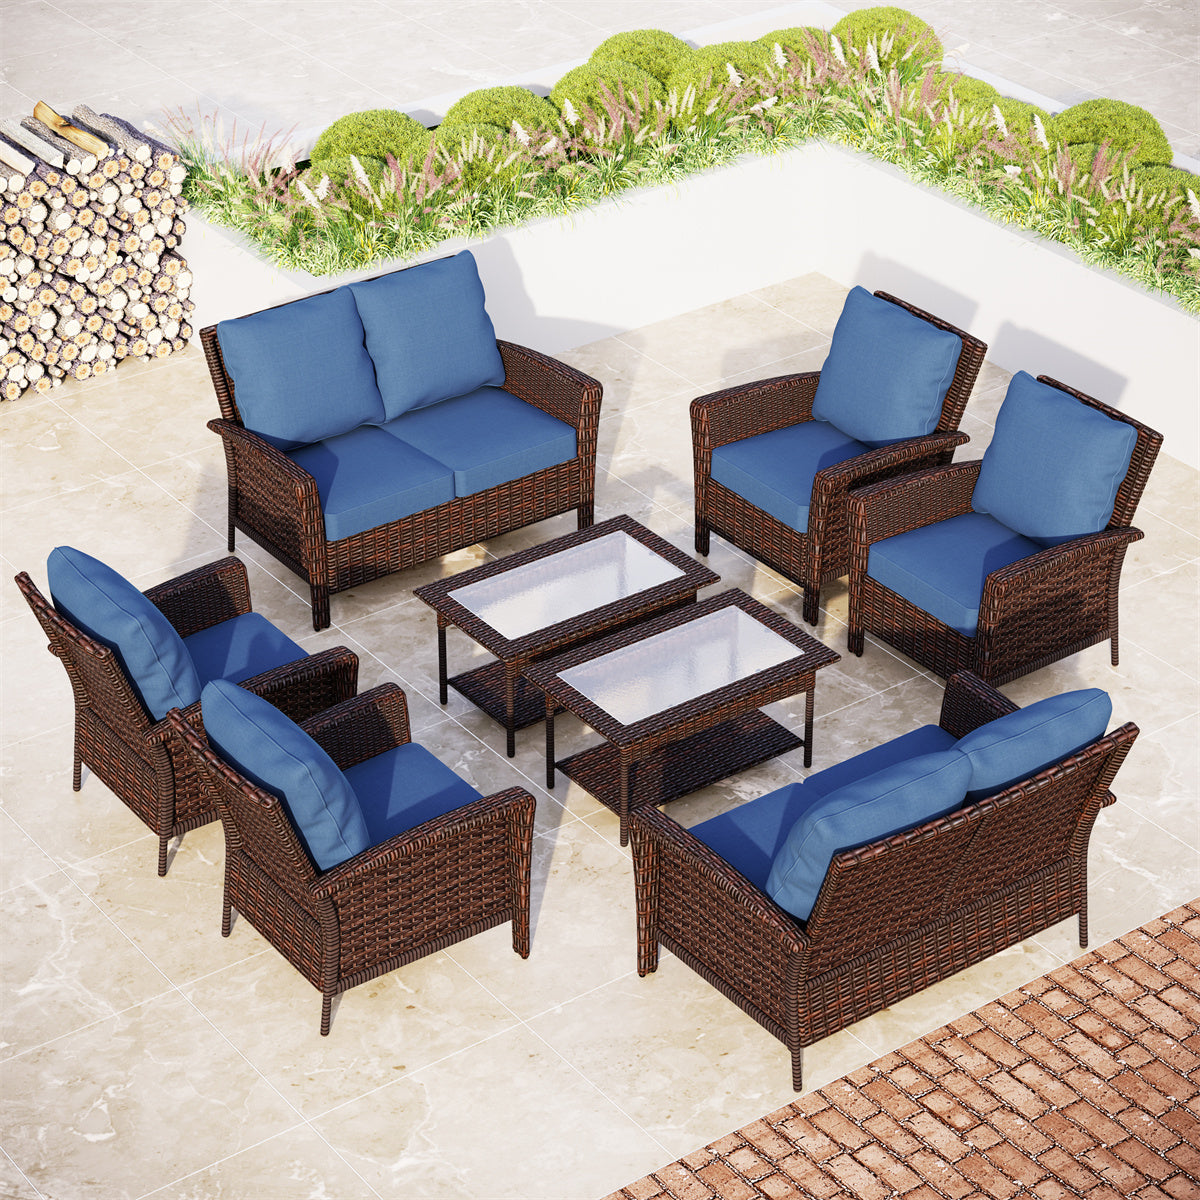 An 8-seat modular wicker sofa set for patio, deck, and balcony. You can place the units according to your scenes and needs.